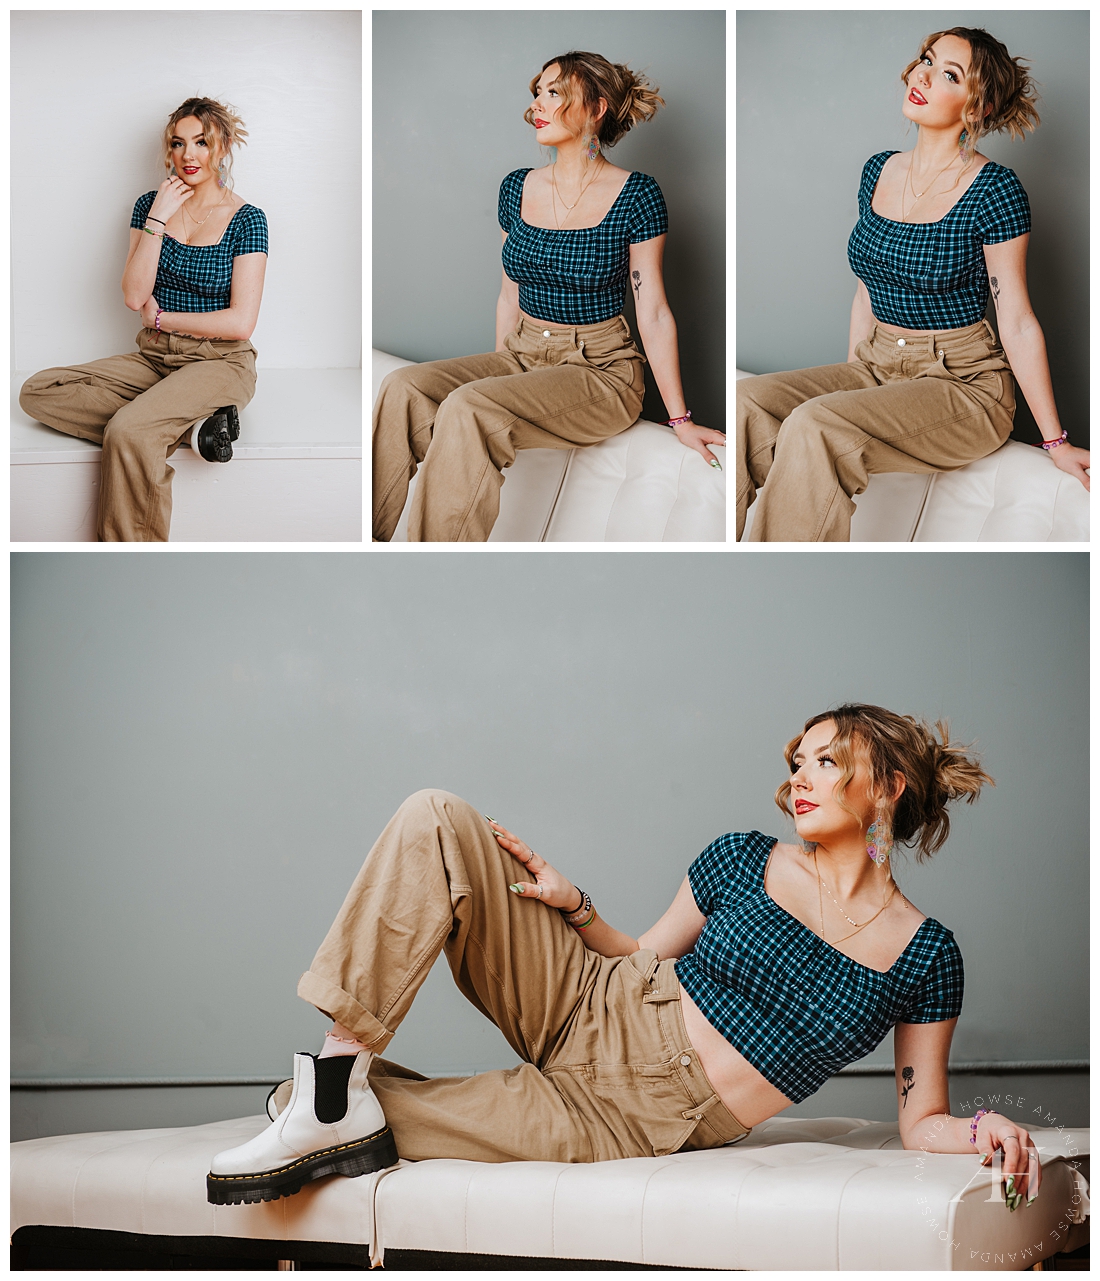 1990s Portrait Session Inspired by Clueless Fashion | Plaid Crop Top and Khakis, Doc Martens | Photographed by Tacoma Photographer Amanda Howse